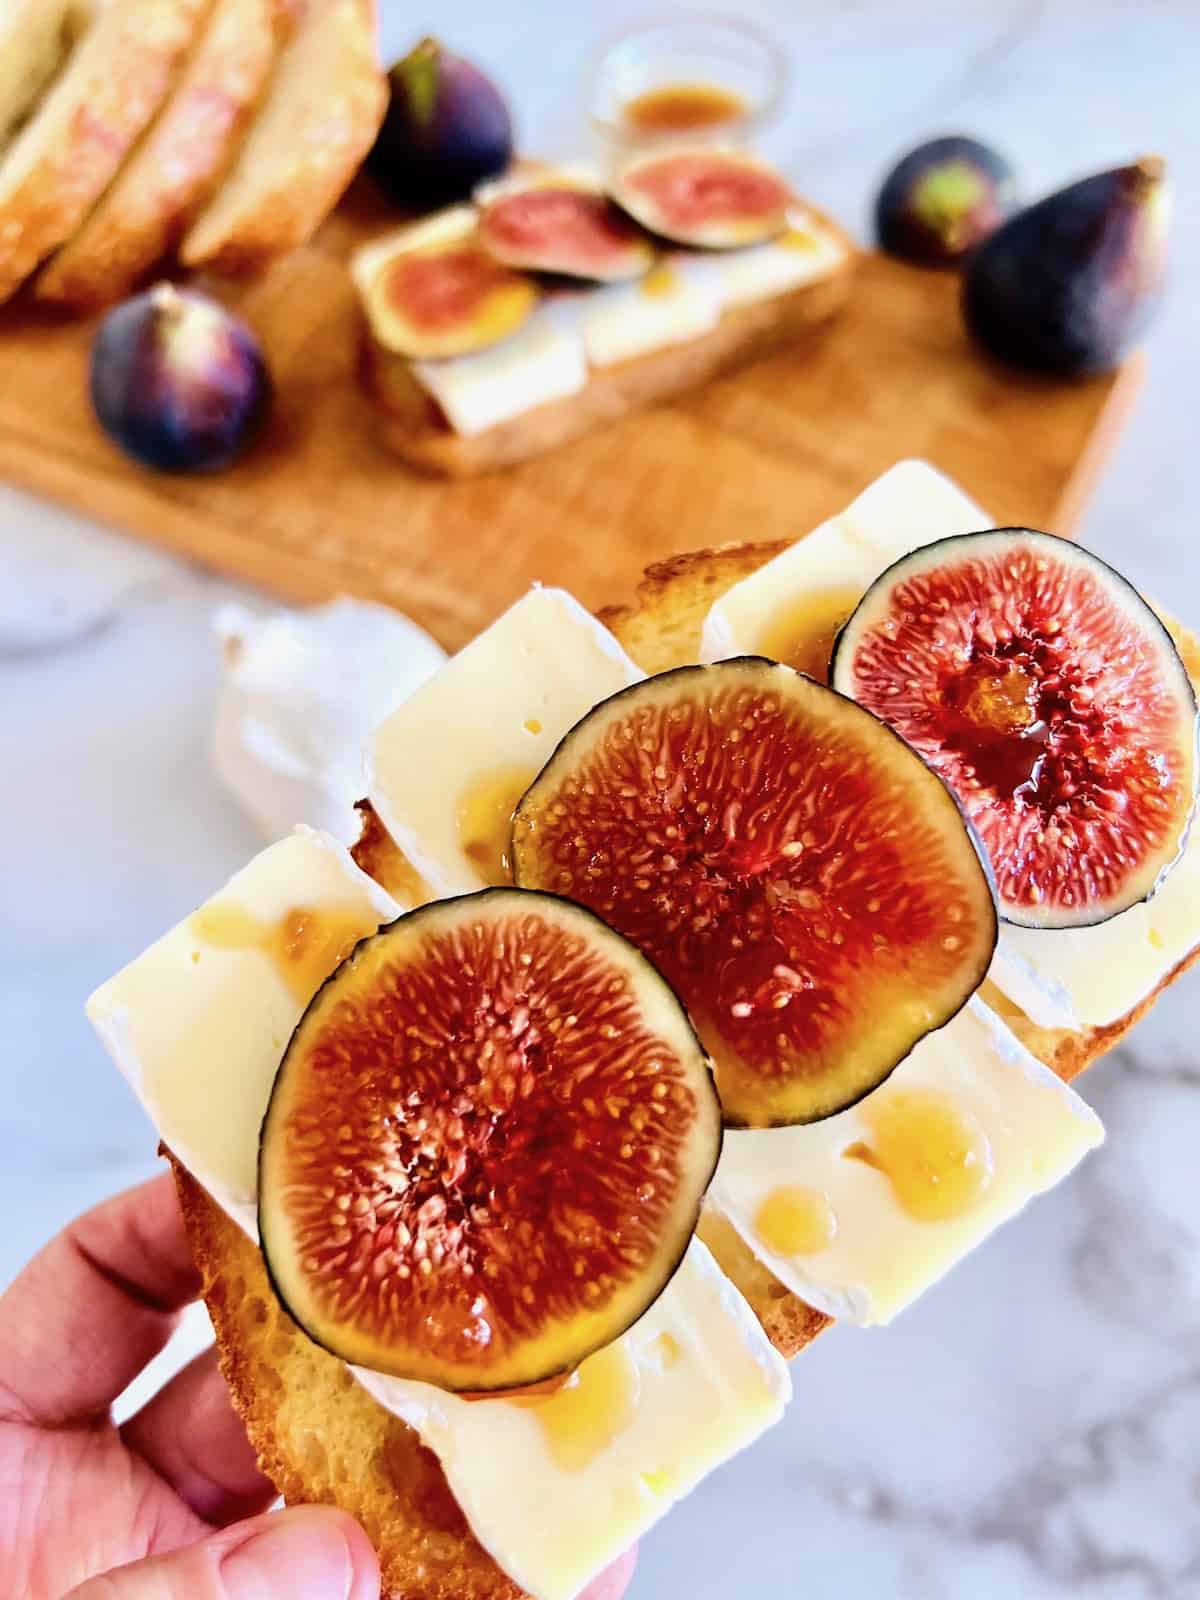 Holding one close up to show drizzled honey over figs and brie on toasted bread.